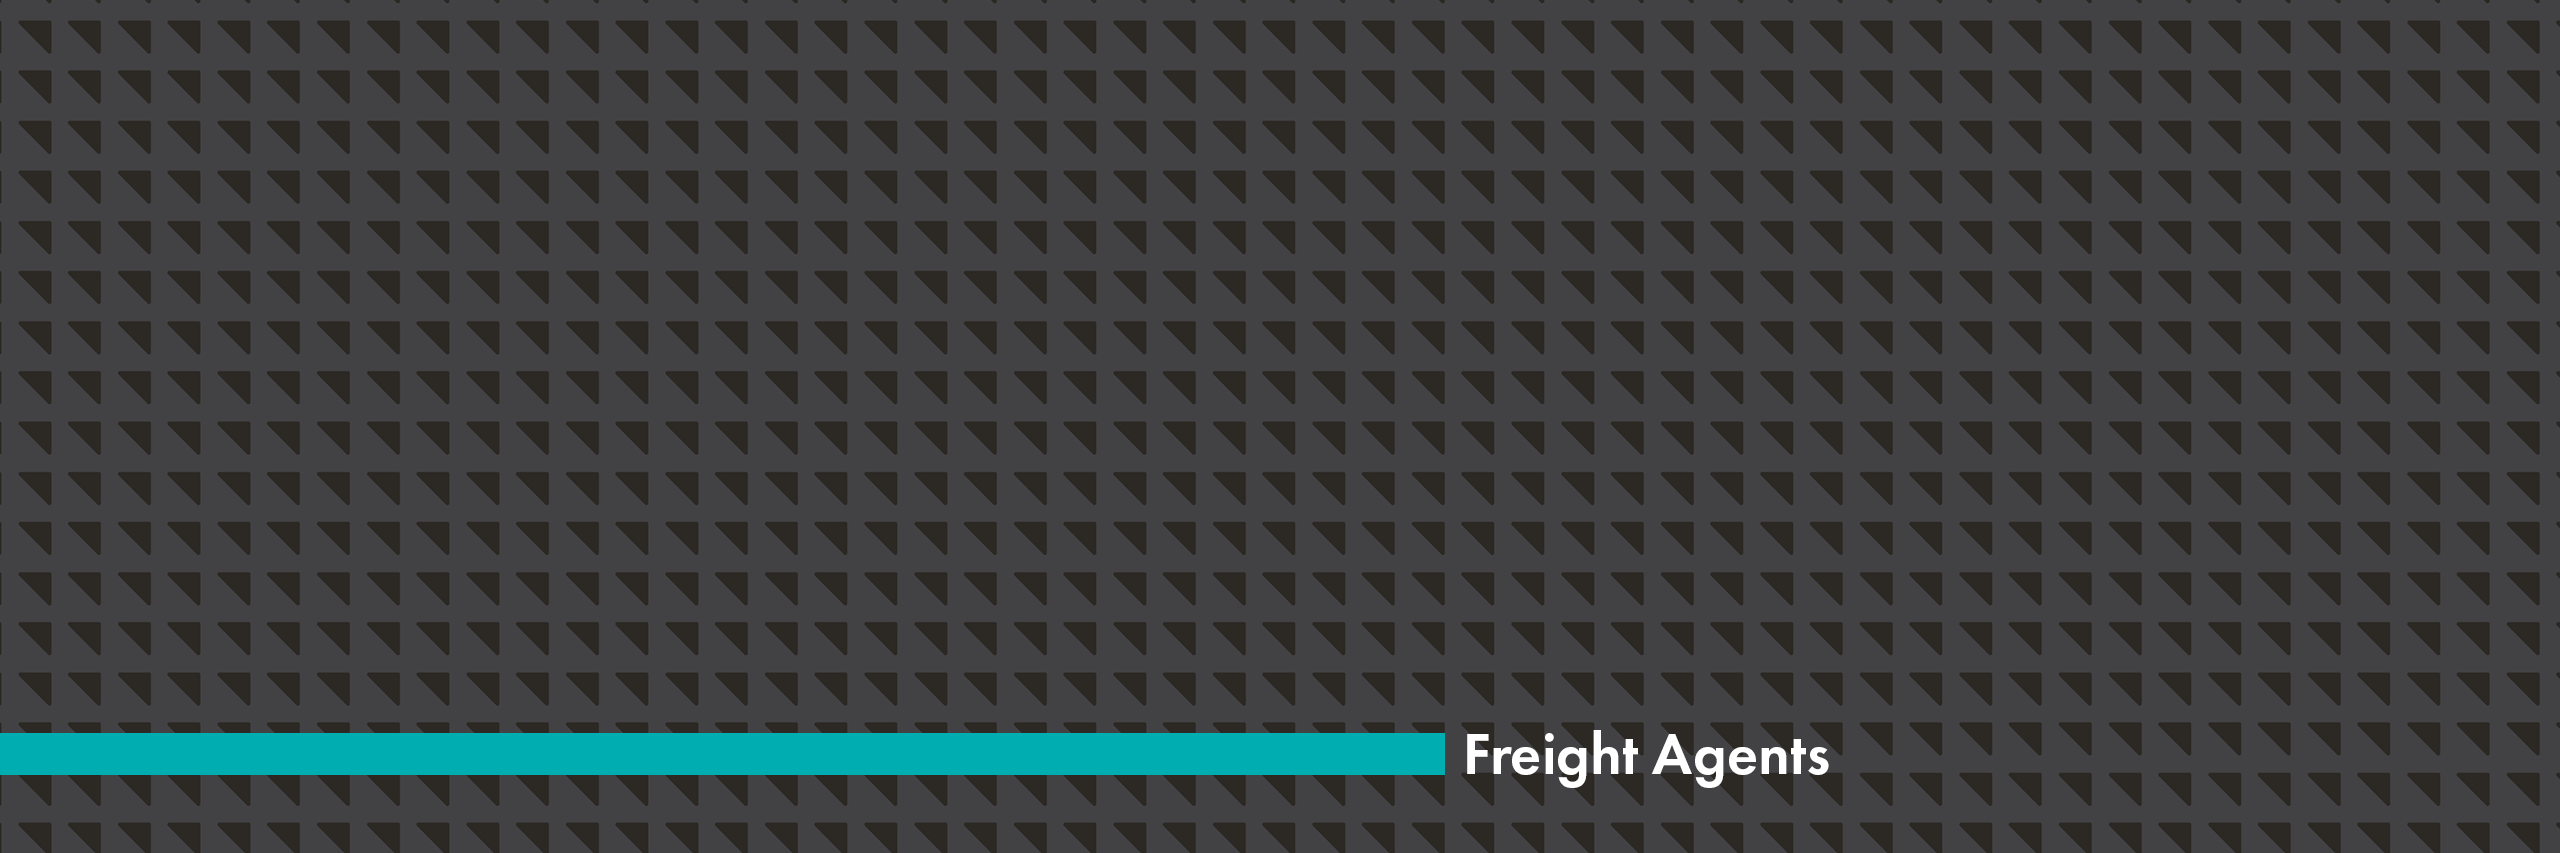 Supporting Freight Agents: The Trinity Way